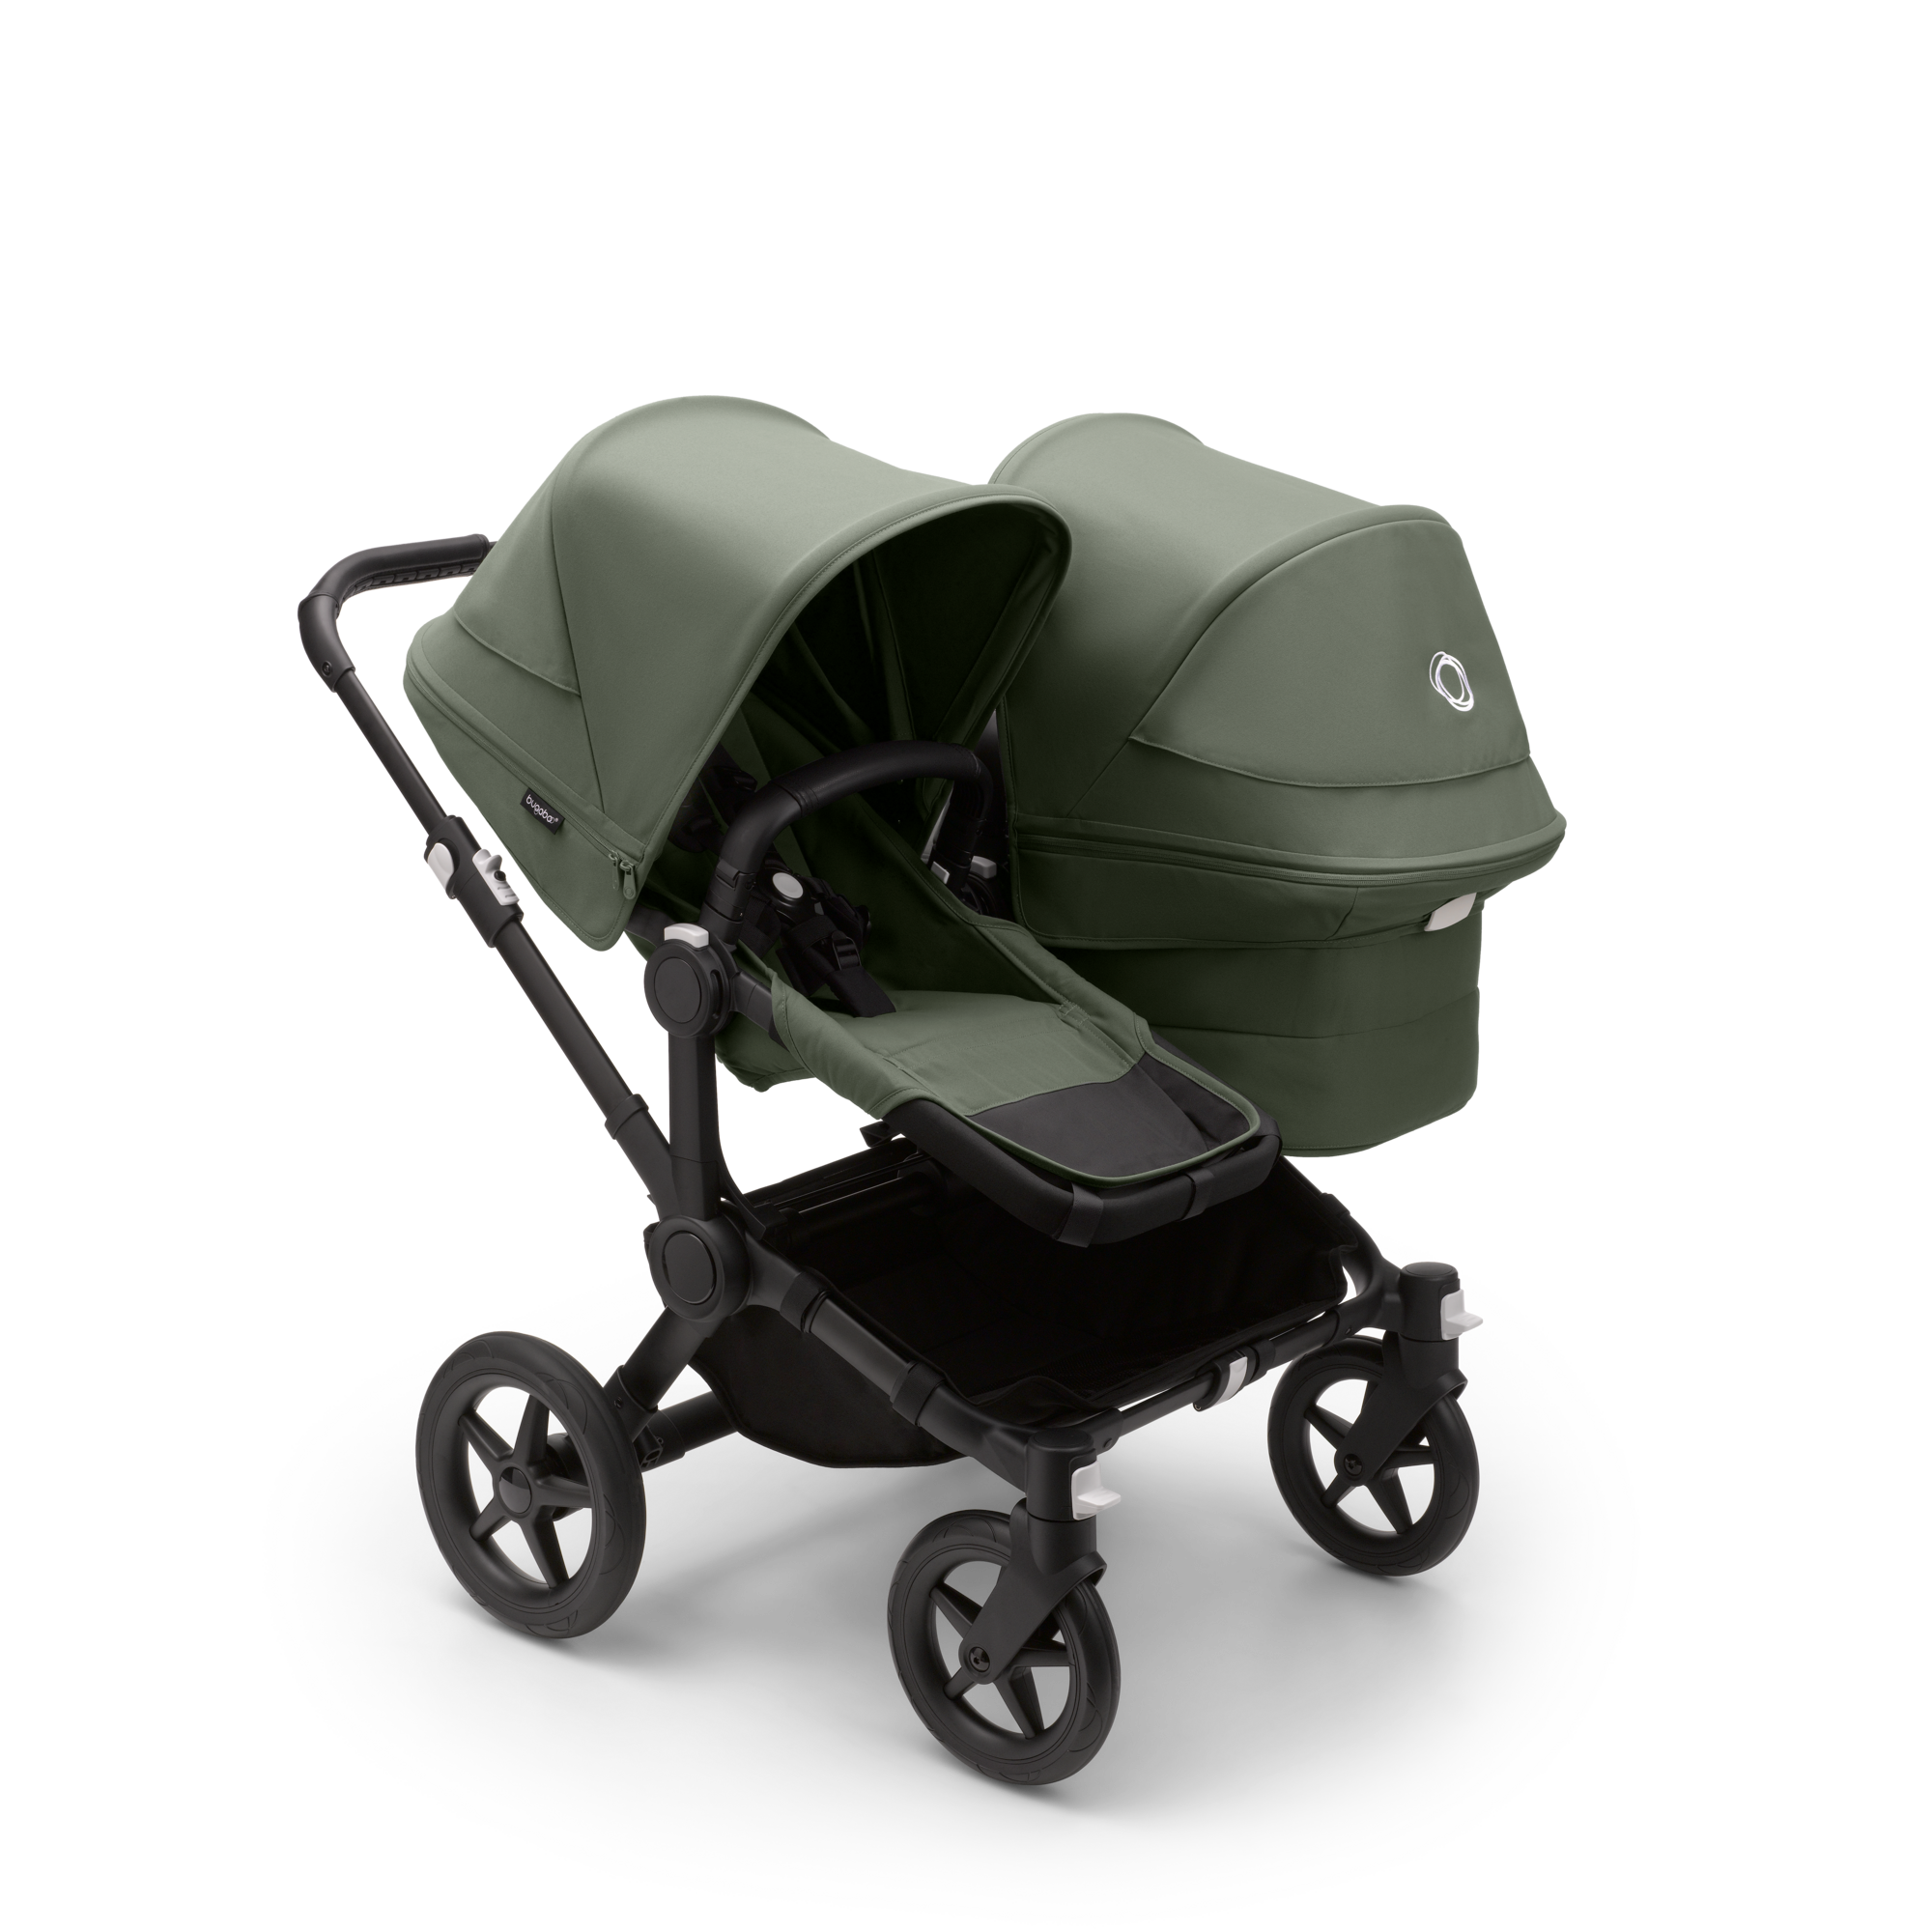 Bugaboo  Bugaboo Donkey 5 Duo bassinet and seat stroller black base forest green fabrics forest green sun canopy